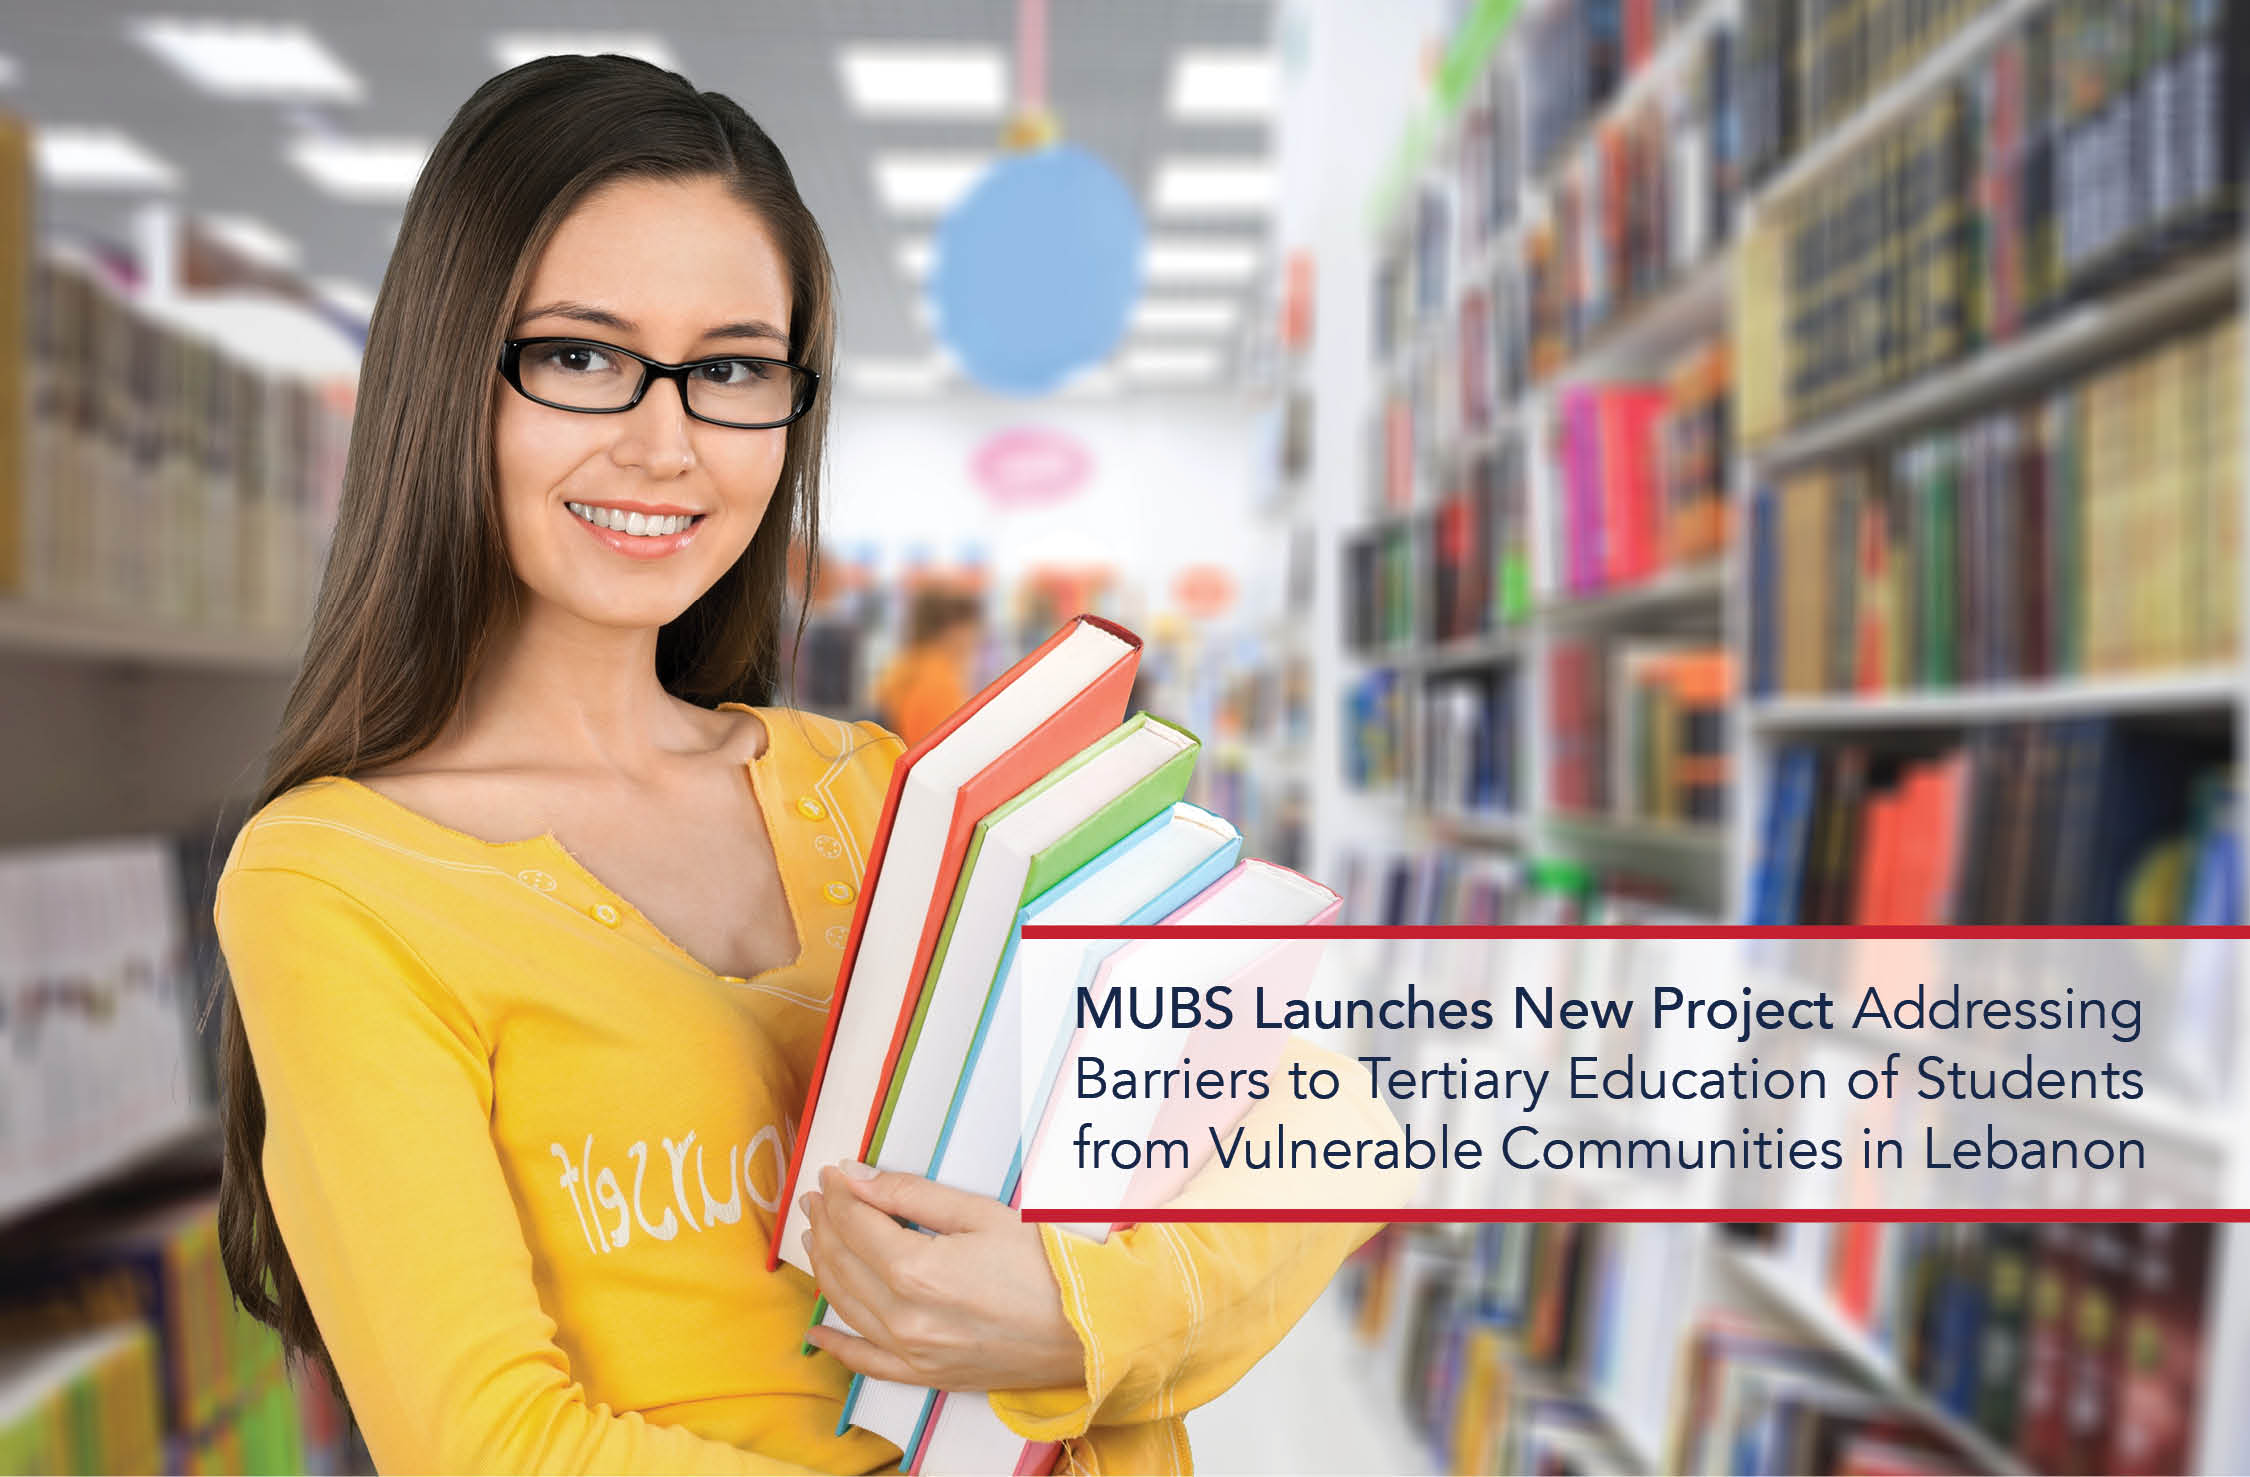 MUBS Launches New Project Addressing Barriers to Tertiary Education of Students from Vulnerable Communities in Lebanon